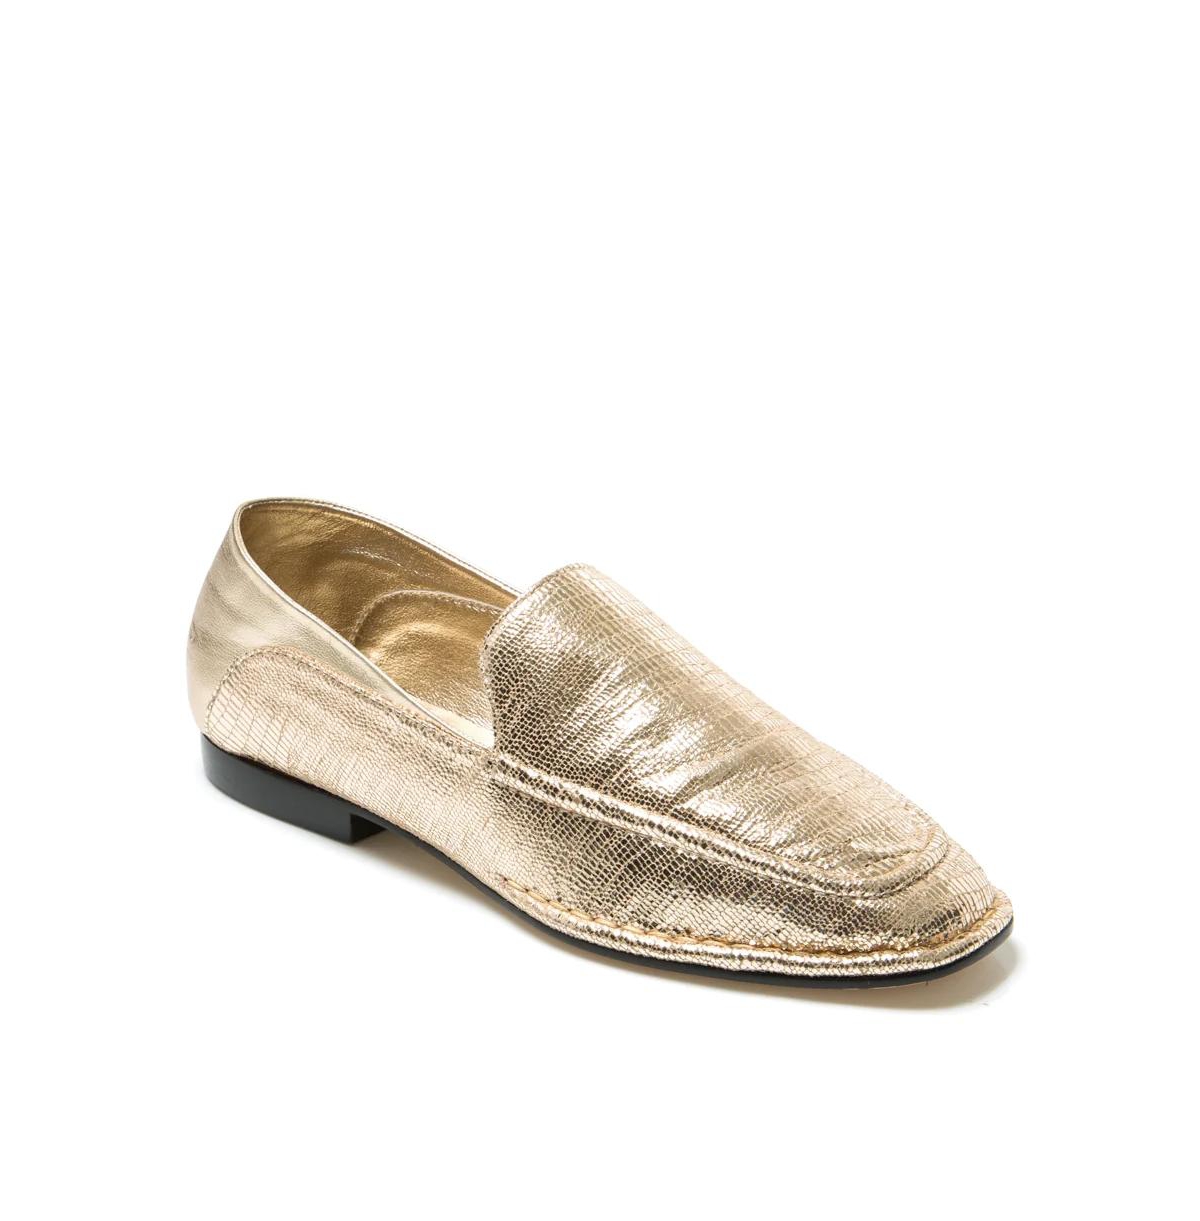 Shoes Women's Madrid Metallic Loafer - Gold